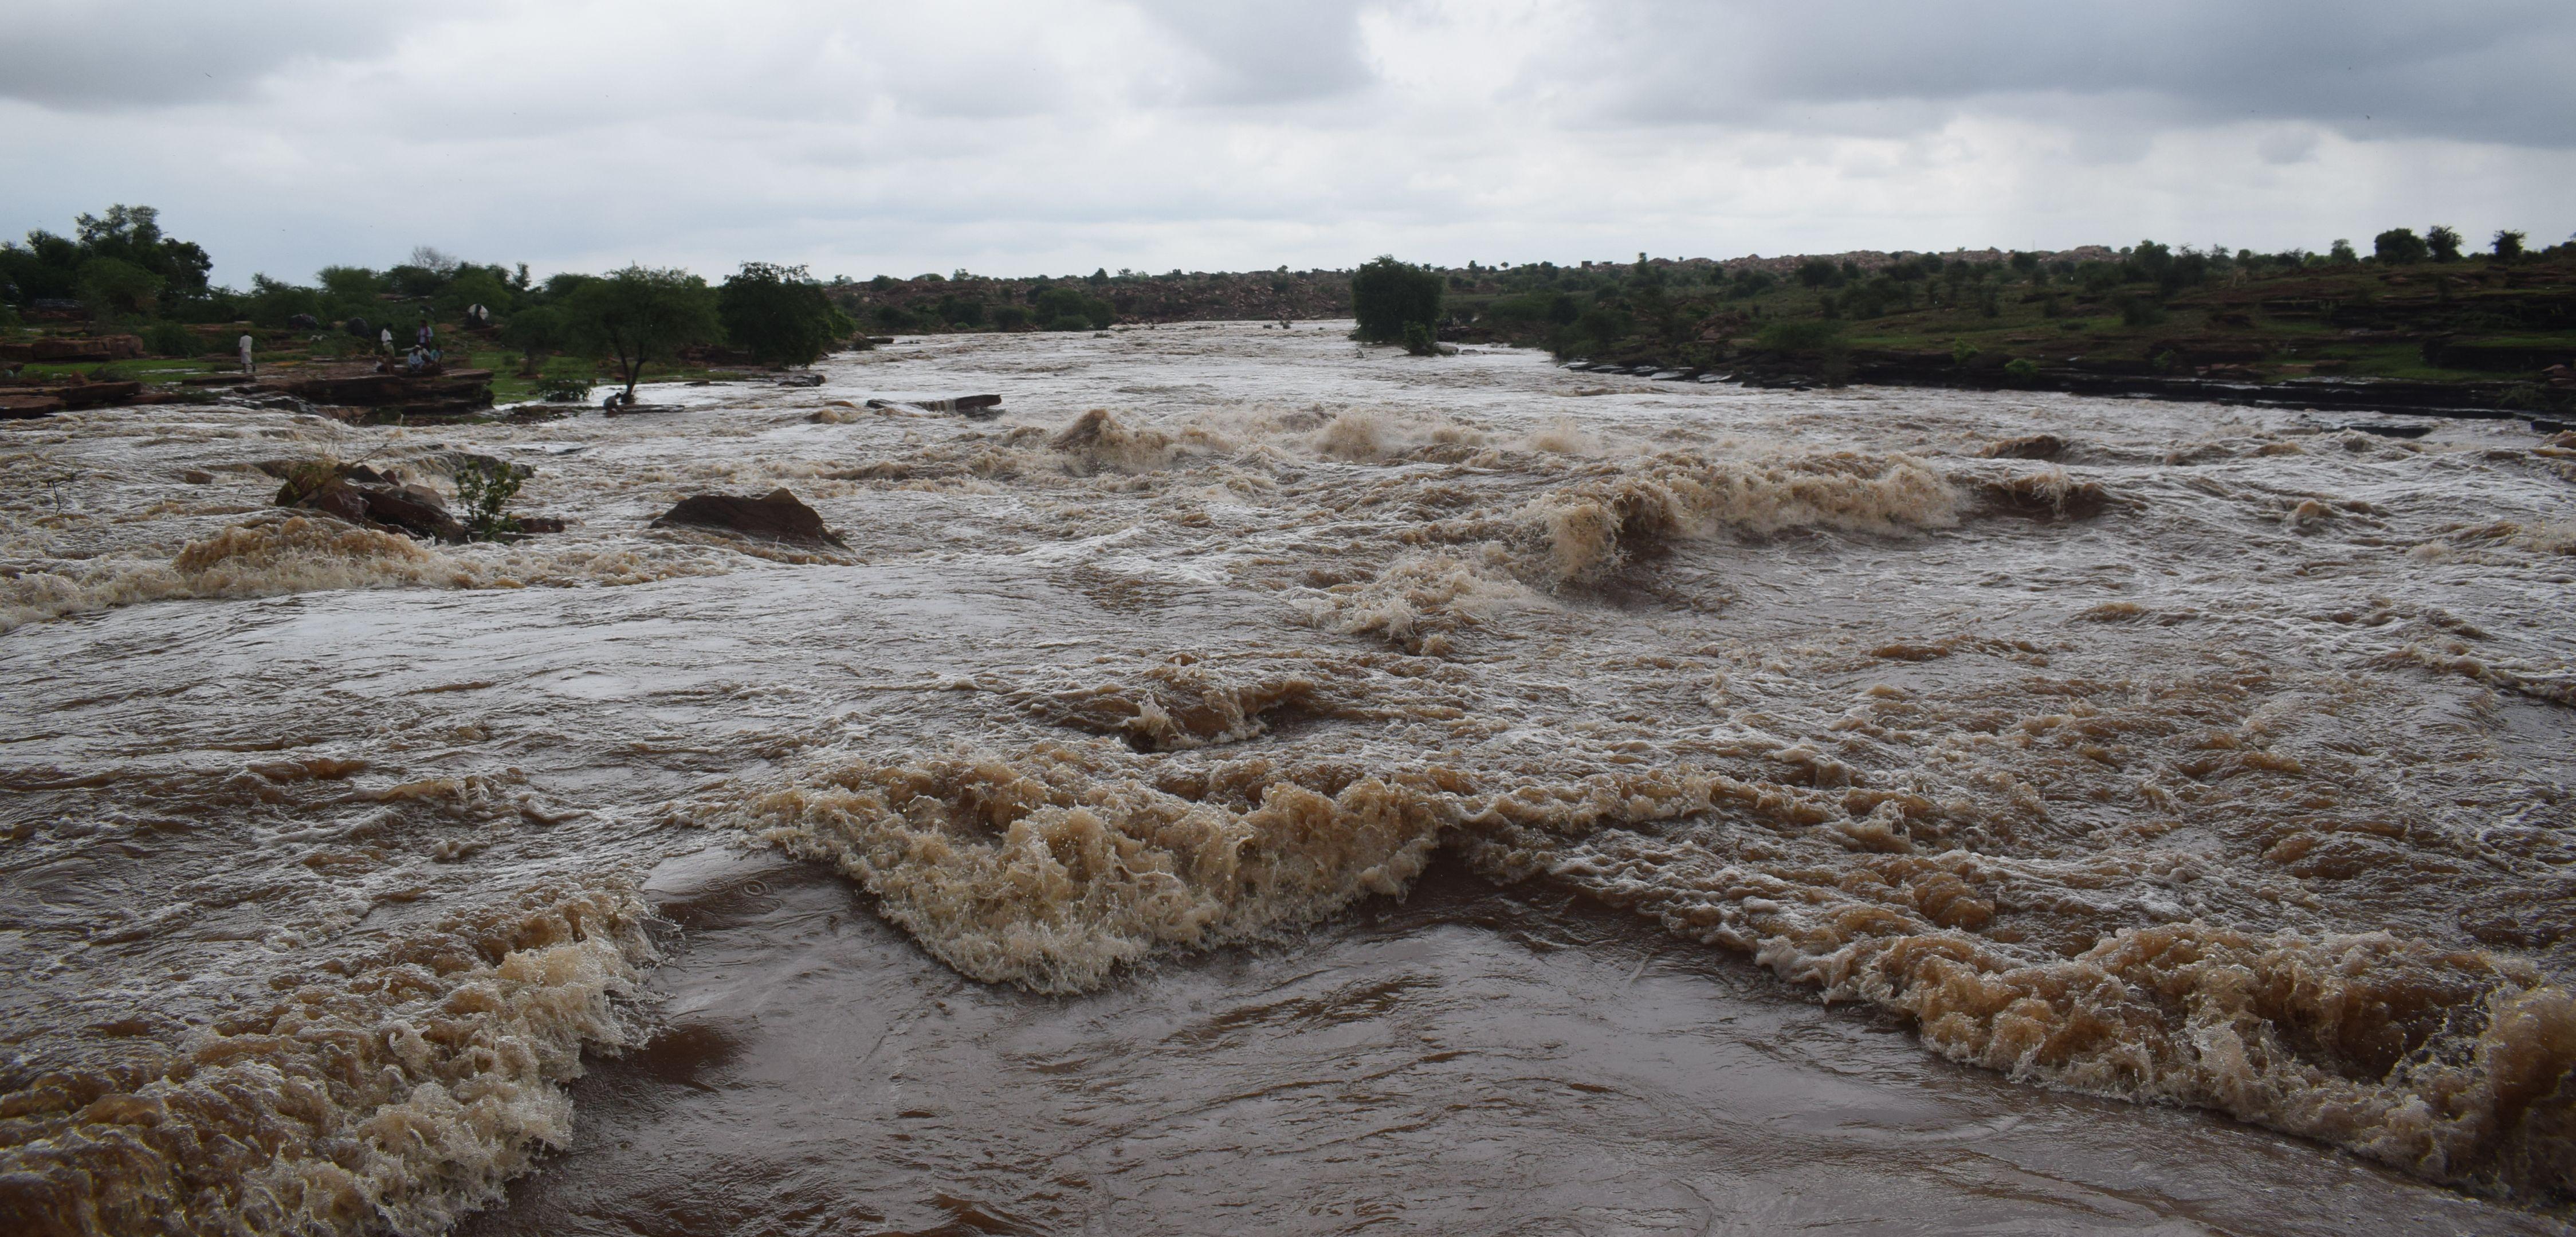 Parvati river in spate for the second day, traffic closed on many roads